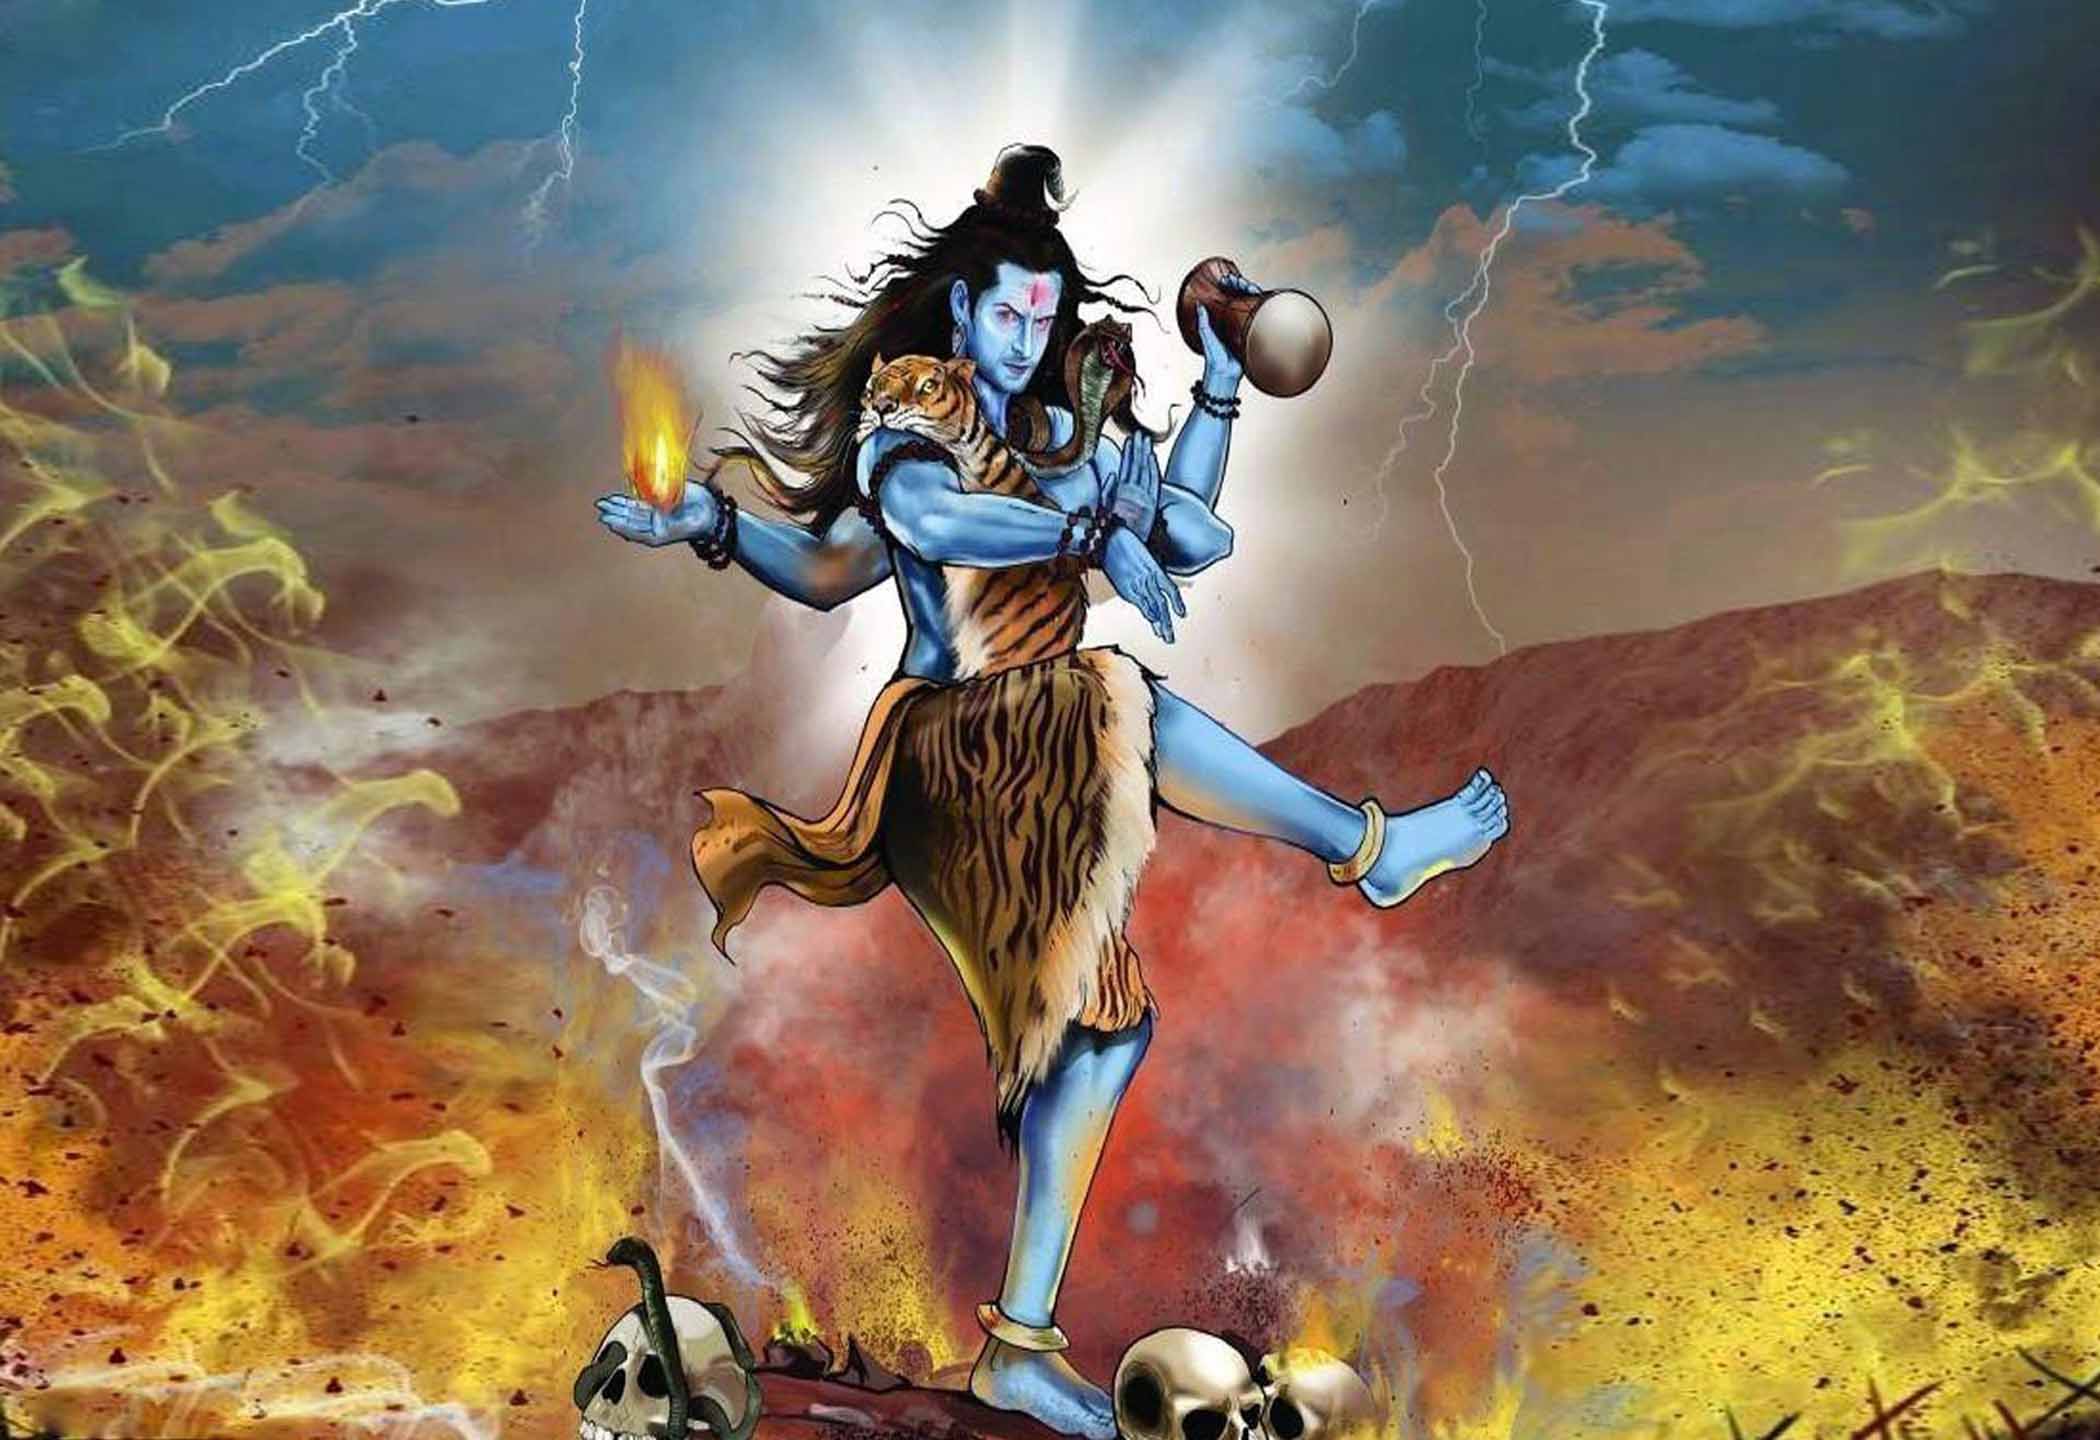 4K wallpaper: Angry Wallpaper Wallpapers 1080p Lord Shiva Hd Images